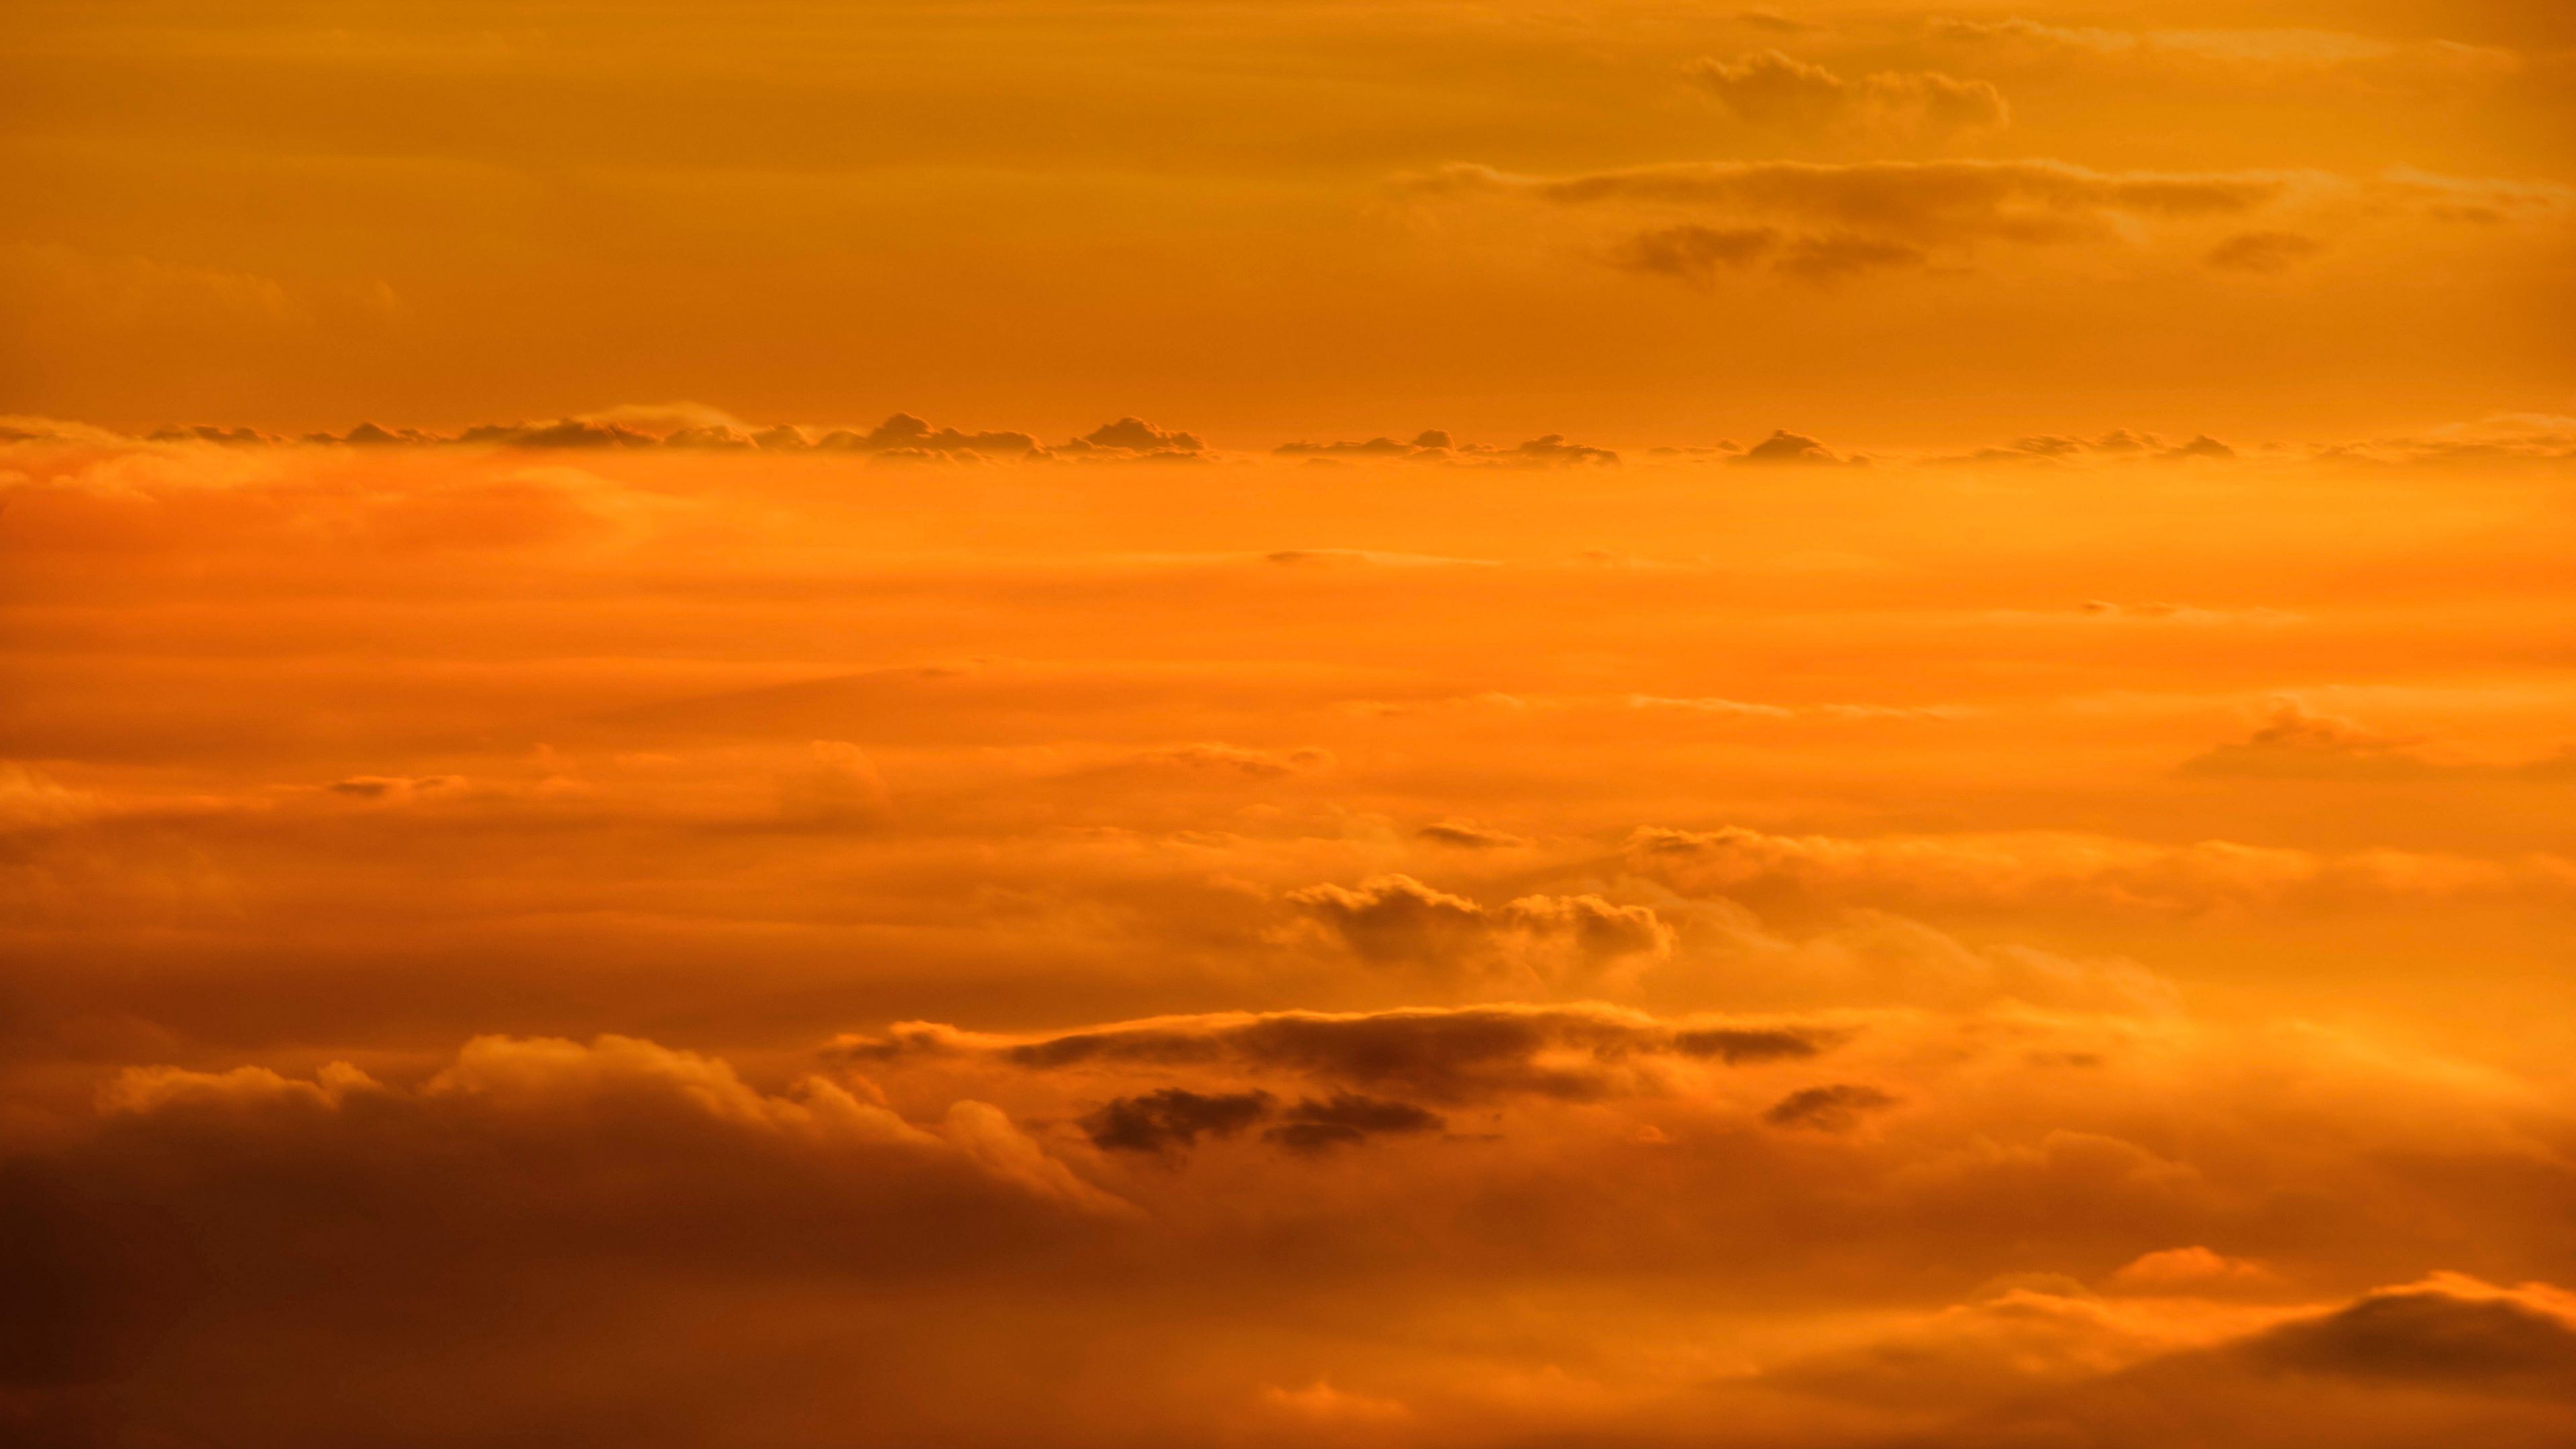 Download wallpaper 3840x2160 clouds, sky, sunset, yellow 4k uhd 16:9 HD background